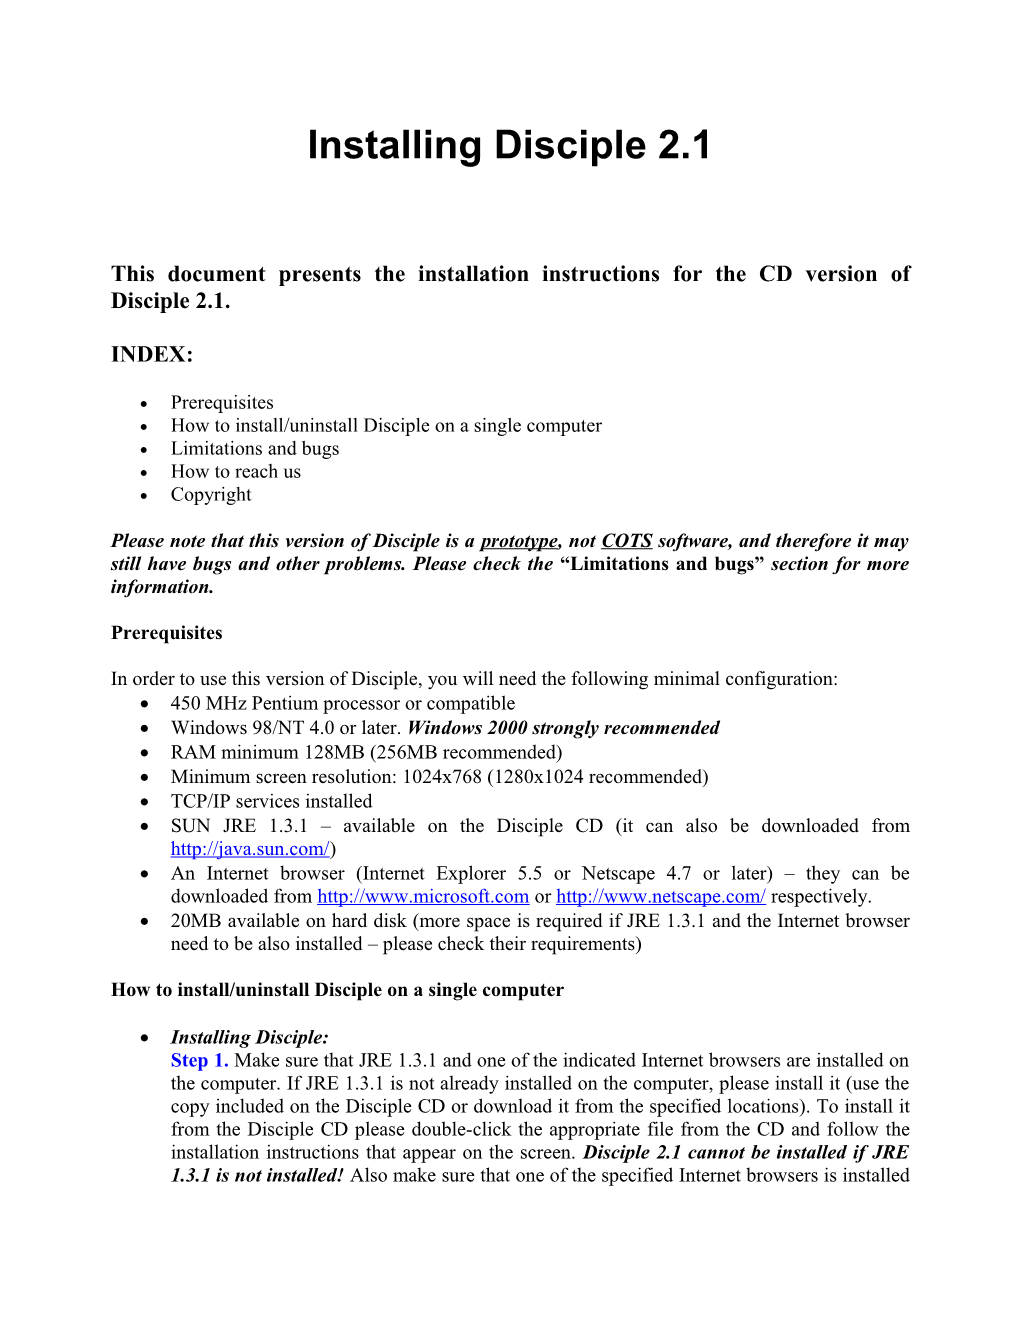 This Document Presents the Installation Instructions for the CD Version of Disciple 2.1